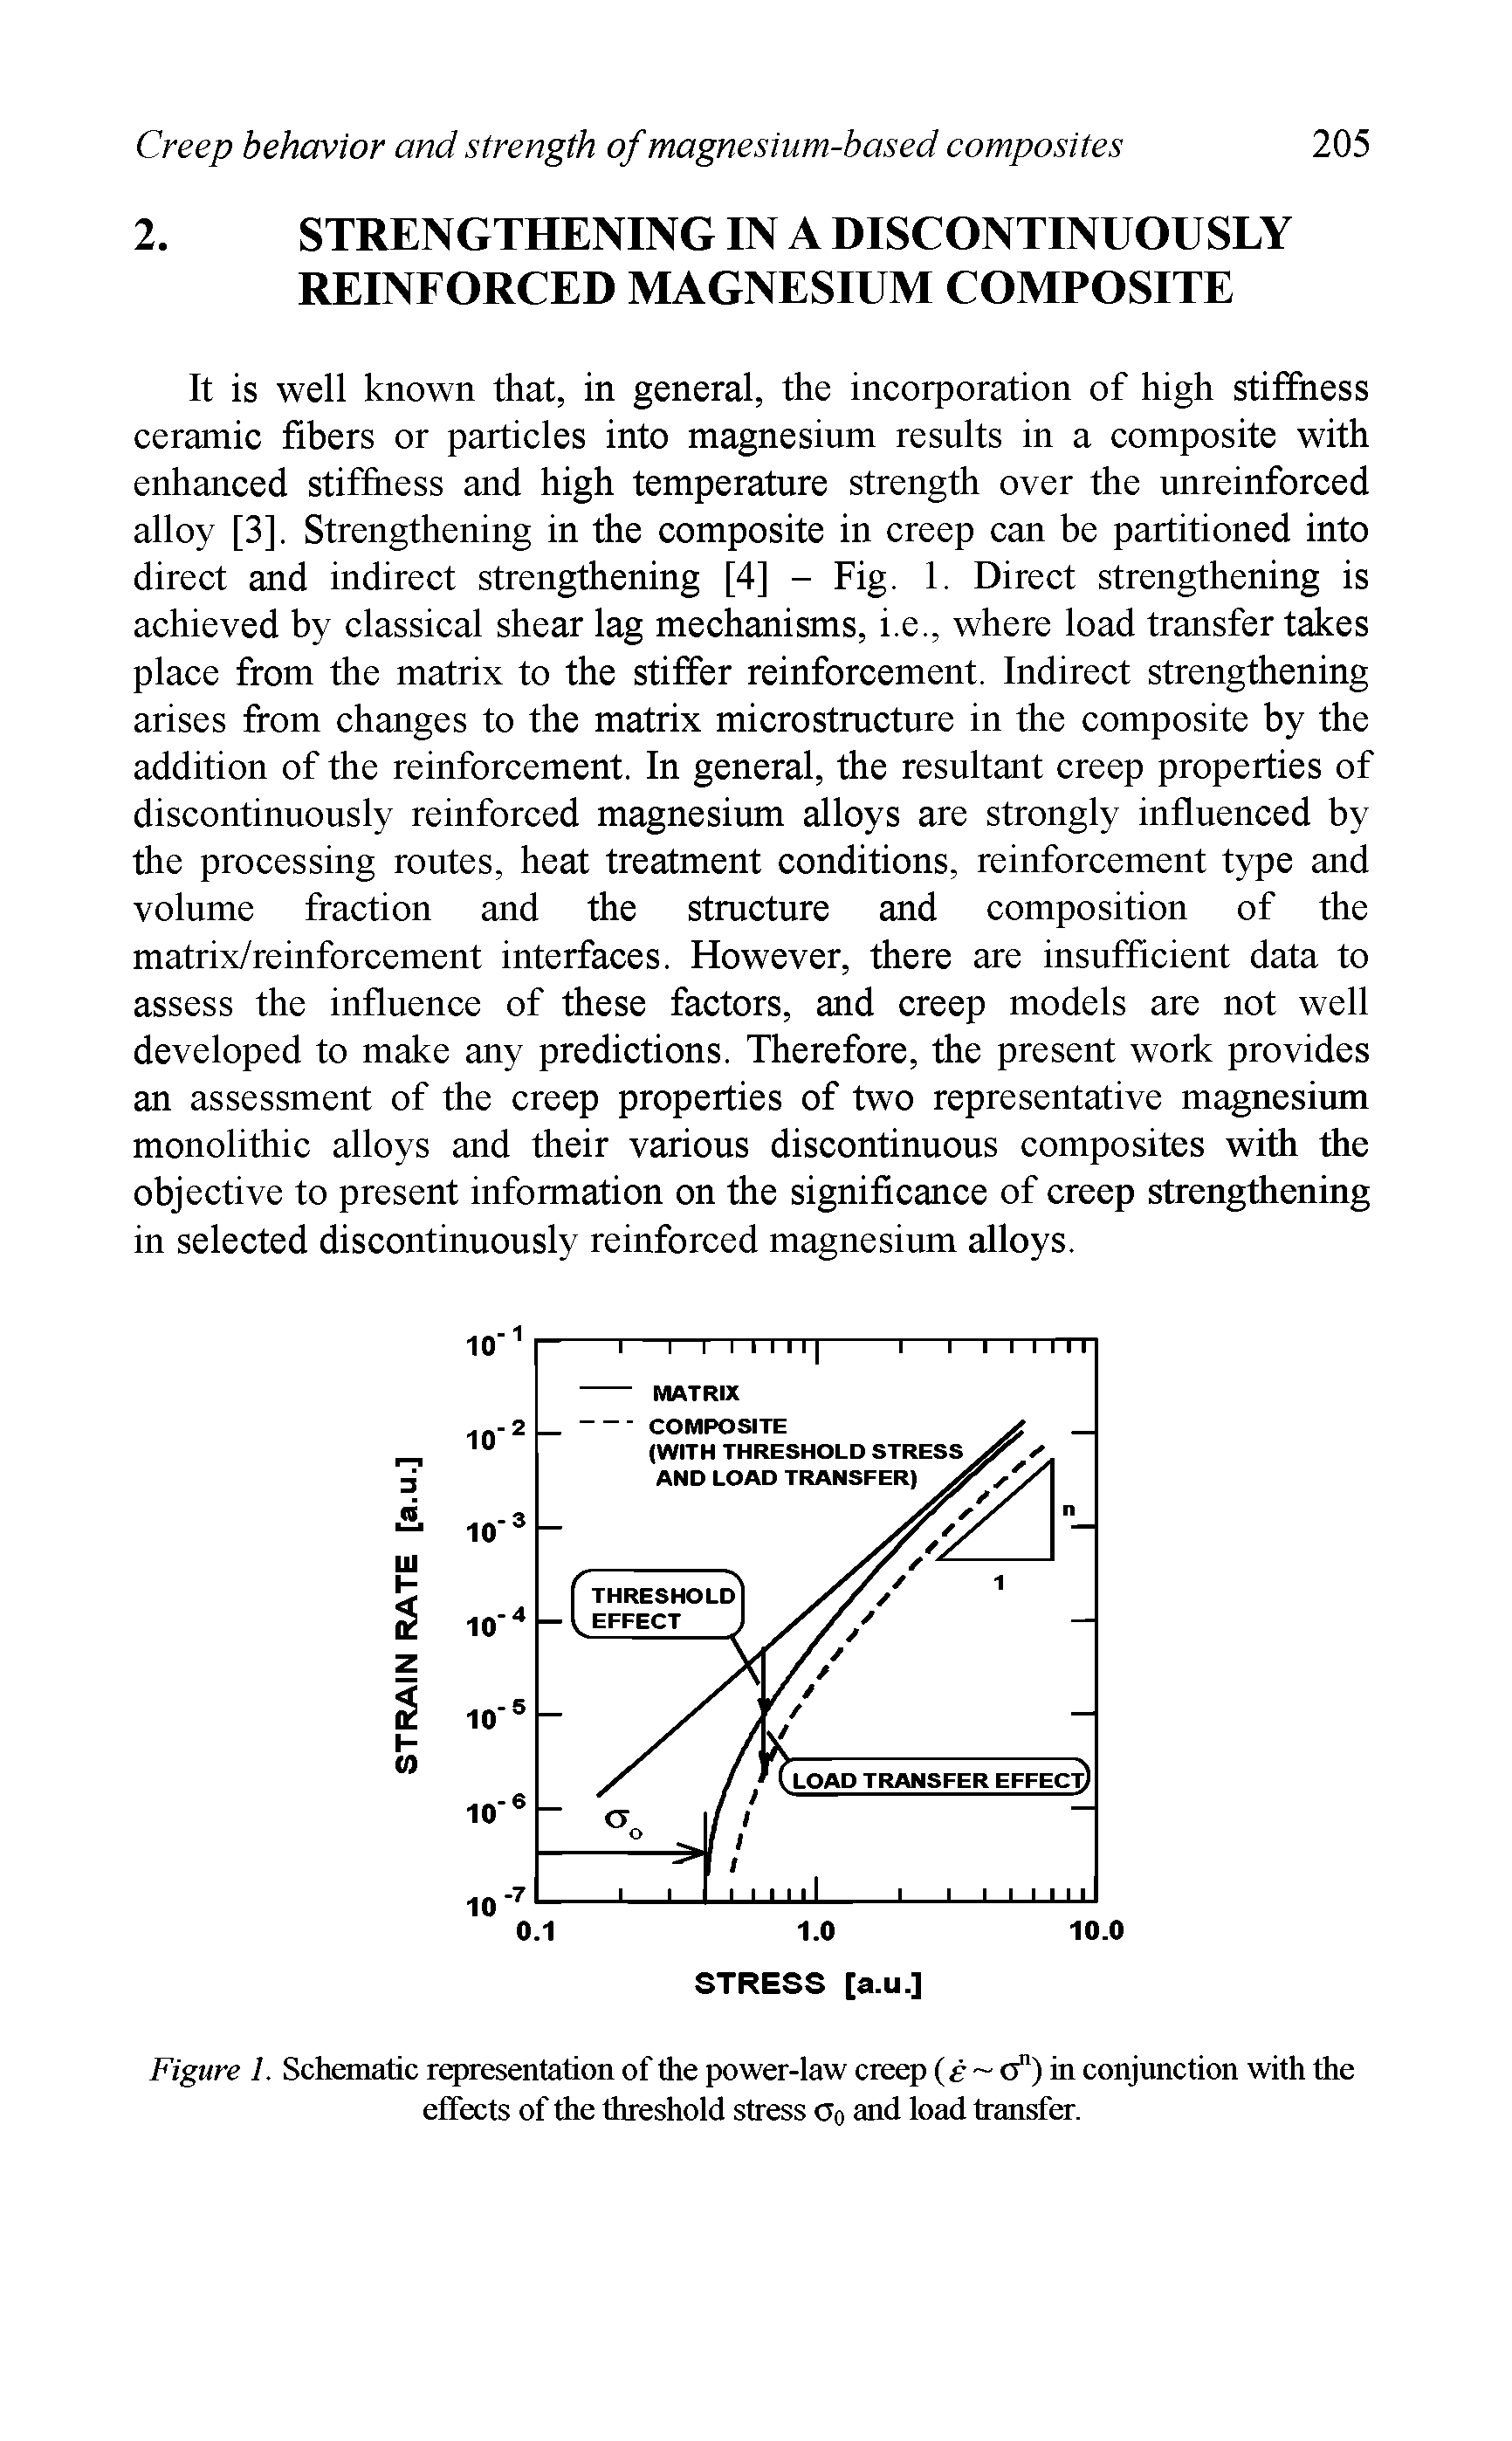 Figure 1. Schematic representation of the power-law creep (e a") in conjunction with the effects of the threshold stress Oo and load transfer.